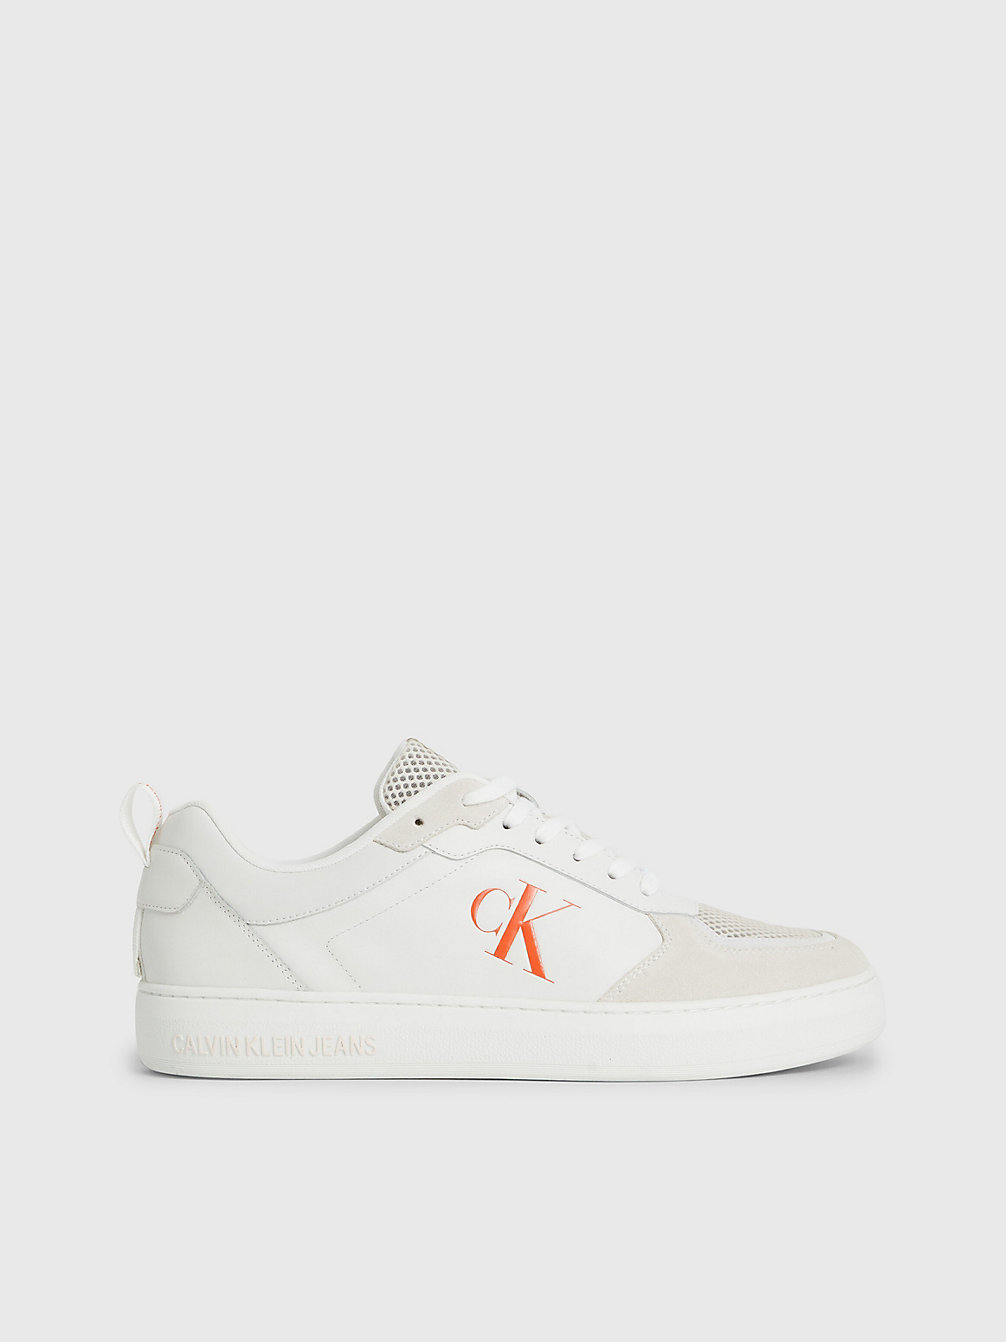 WHITE Leather Trainers undefined men Calvin Klein